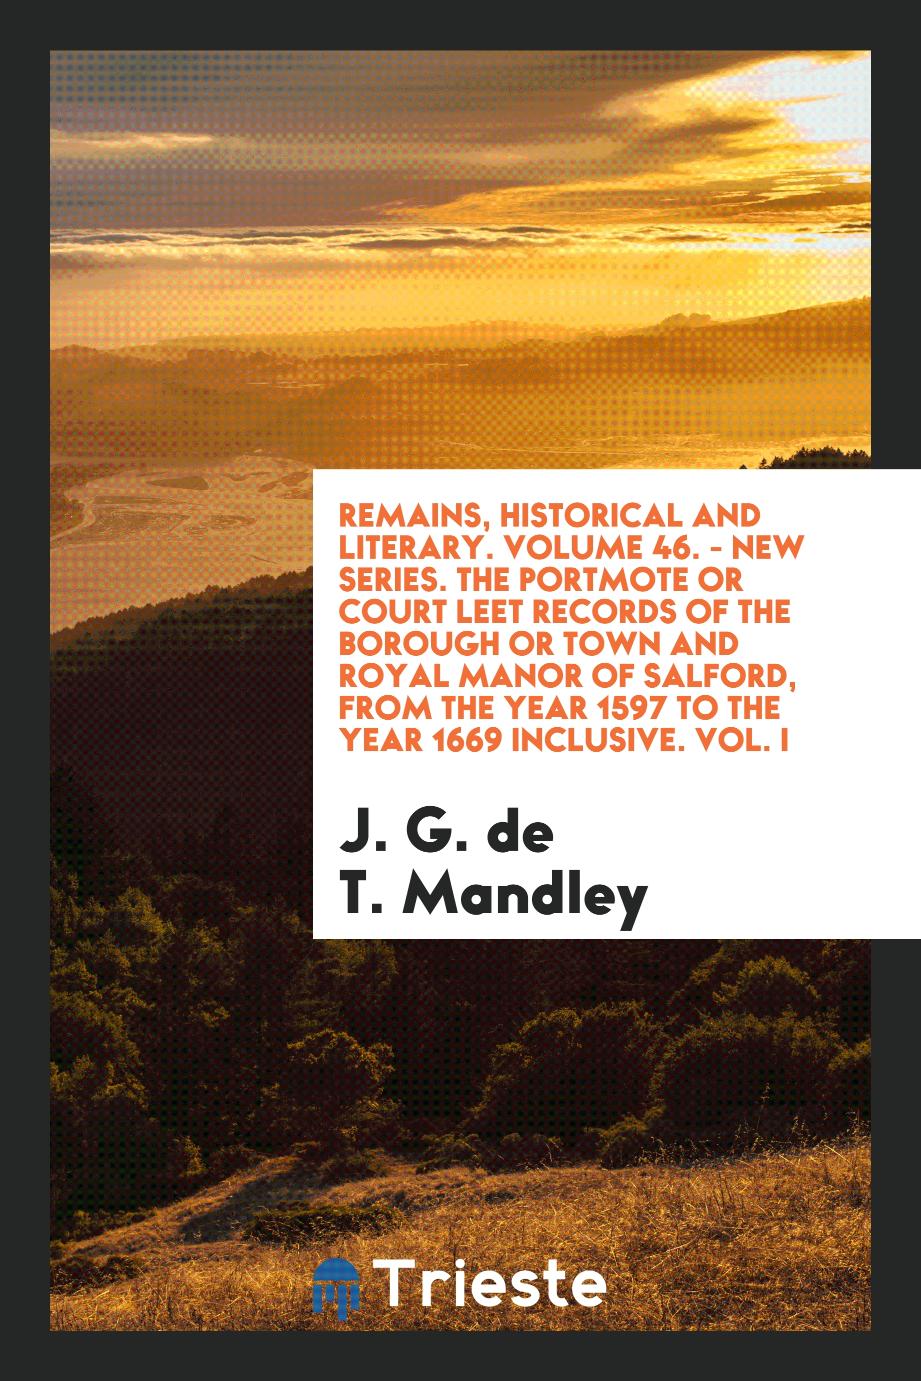 Remains, Historical and Literary. Volume 46. - New Series. The Portmote or Court Leet Records of the Borough or Town and Royal Manor of Salford, from the Year 1597 to the Year 1669 Inclusive. Vol. I